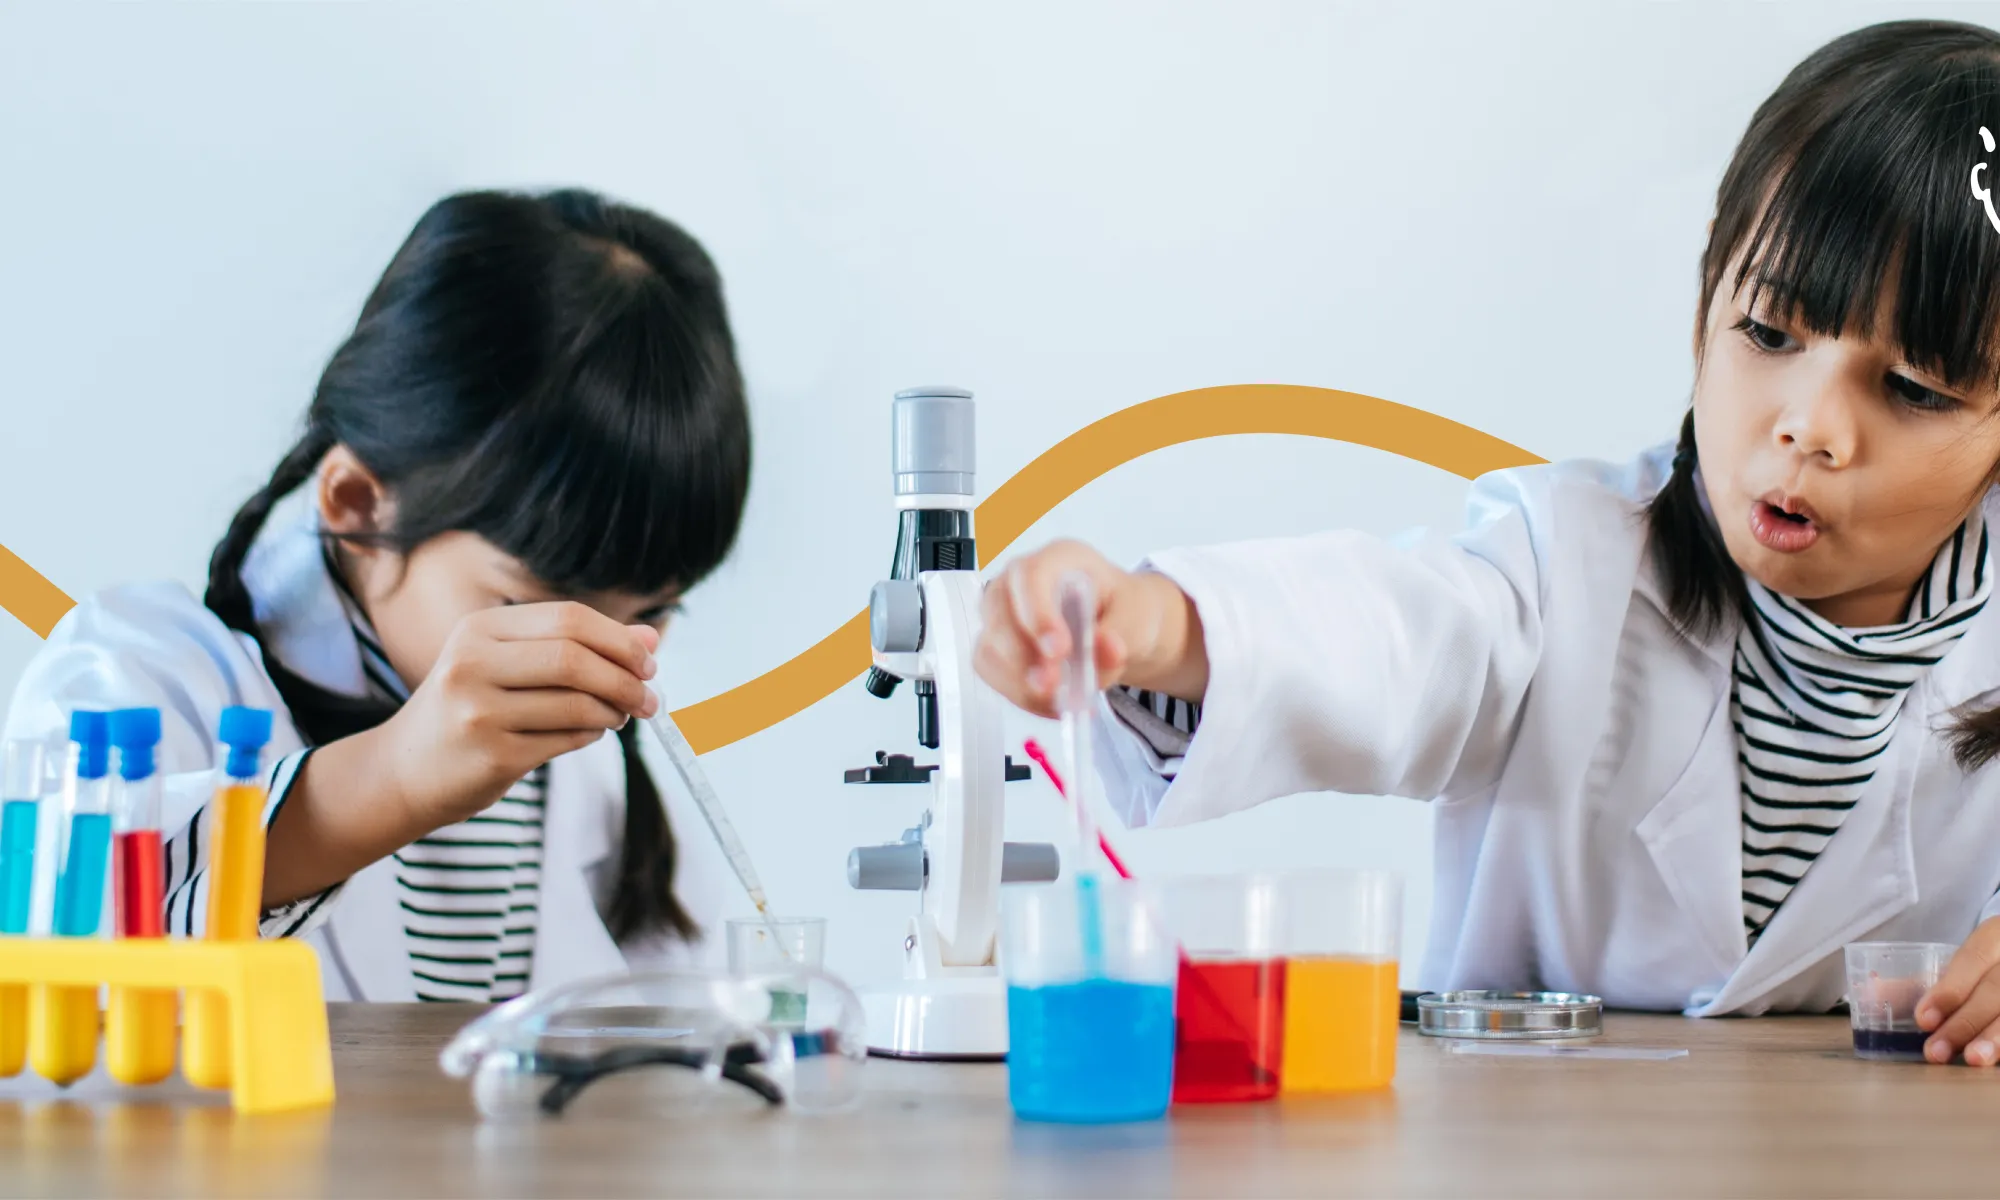 Top 10 benefits of science experiments for children